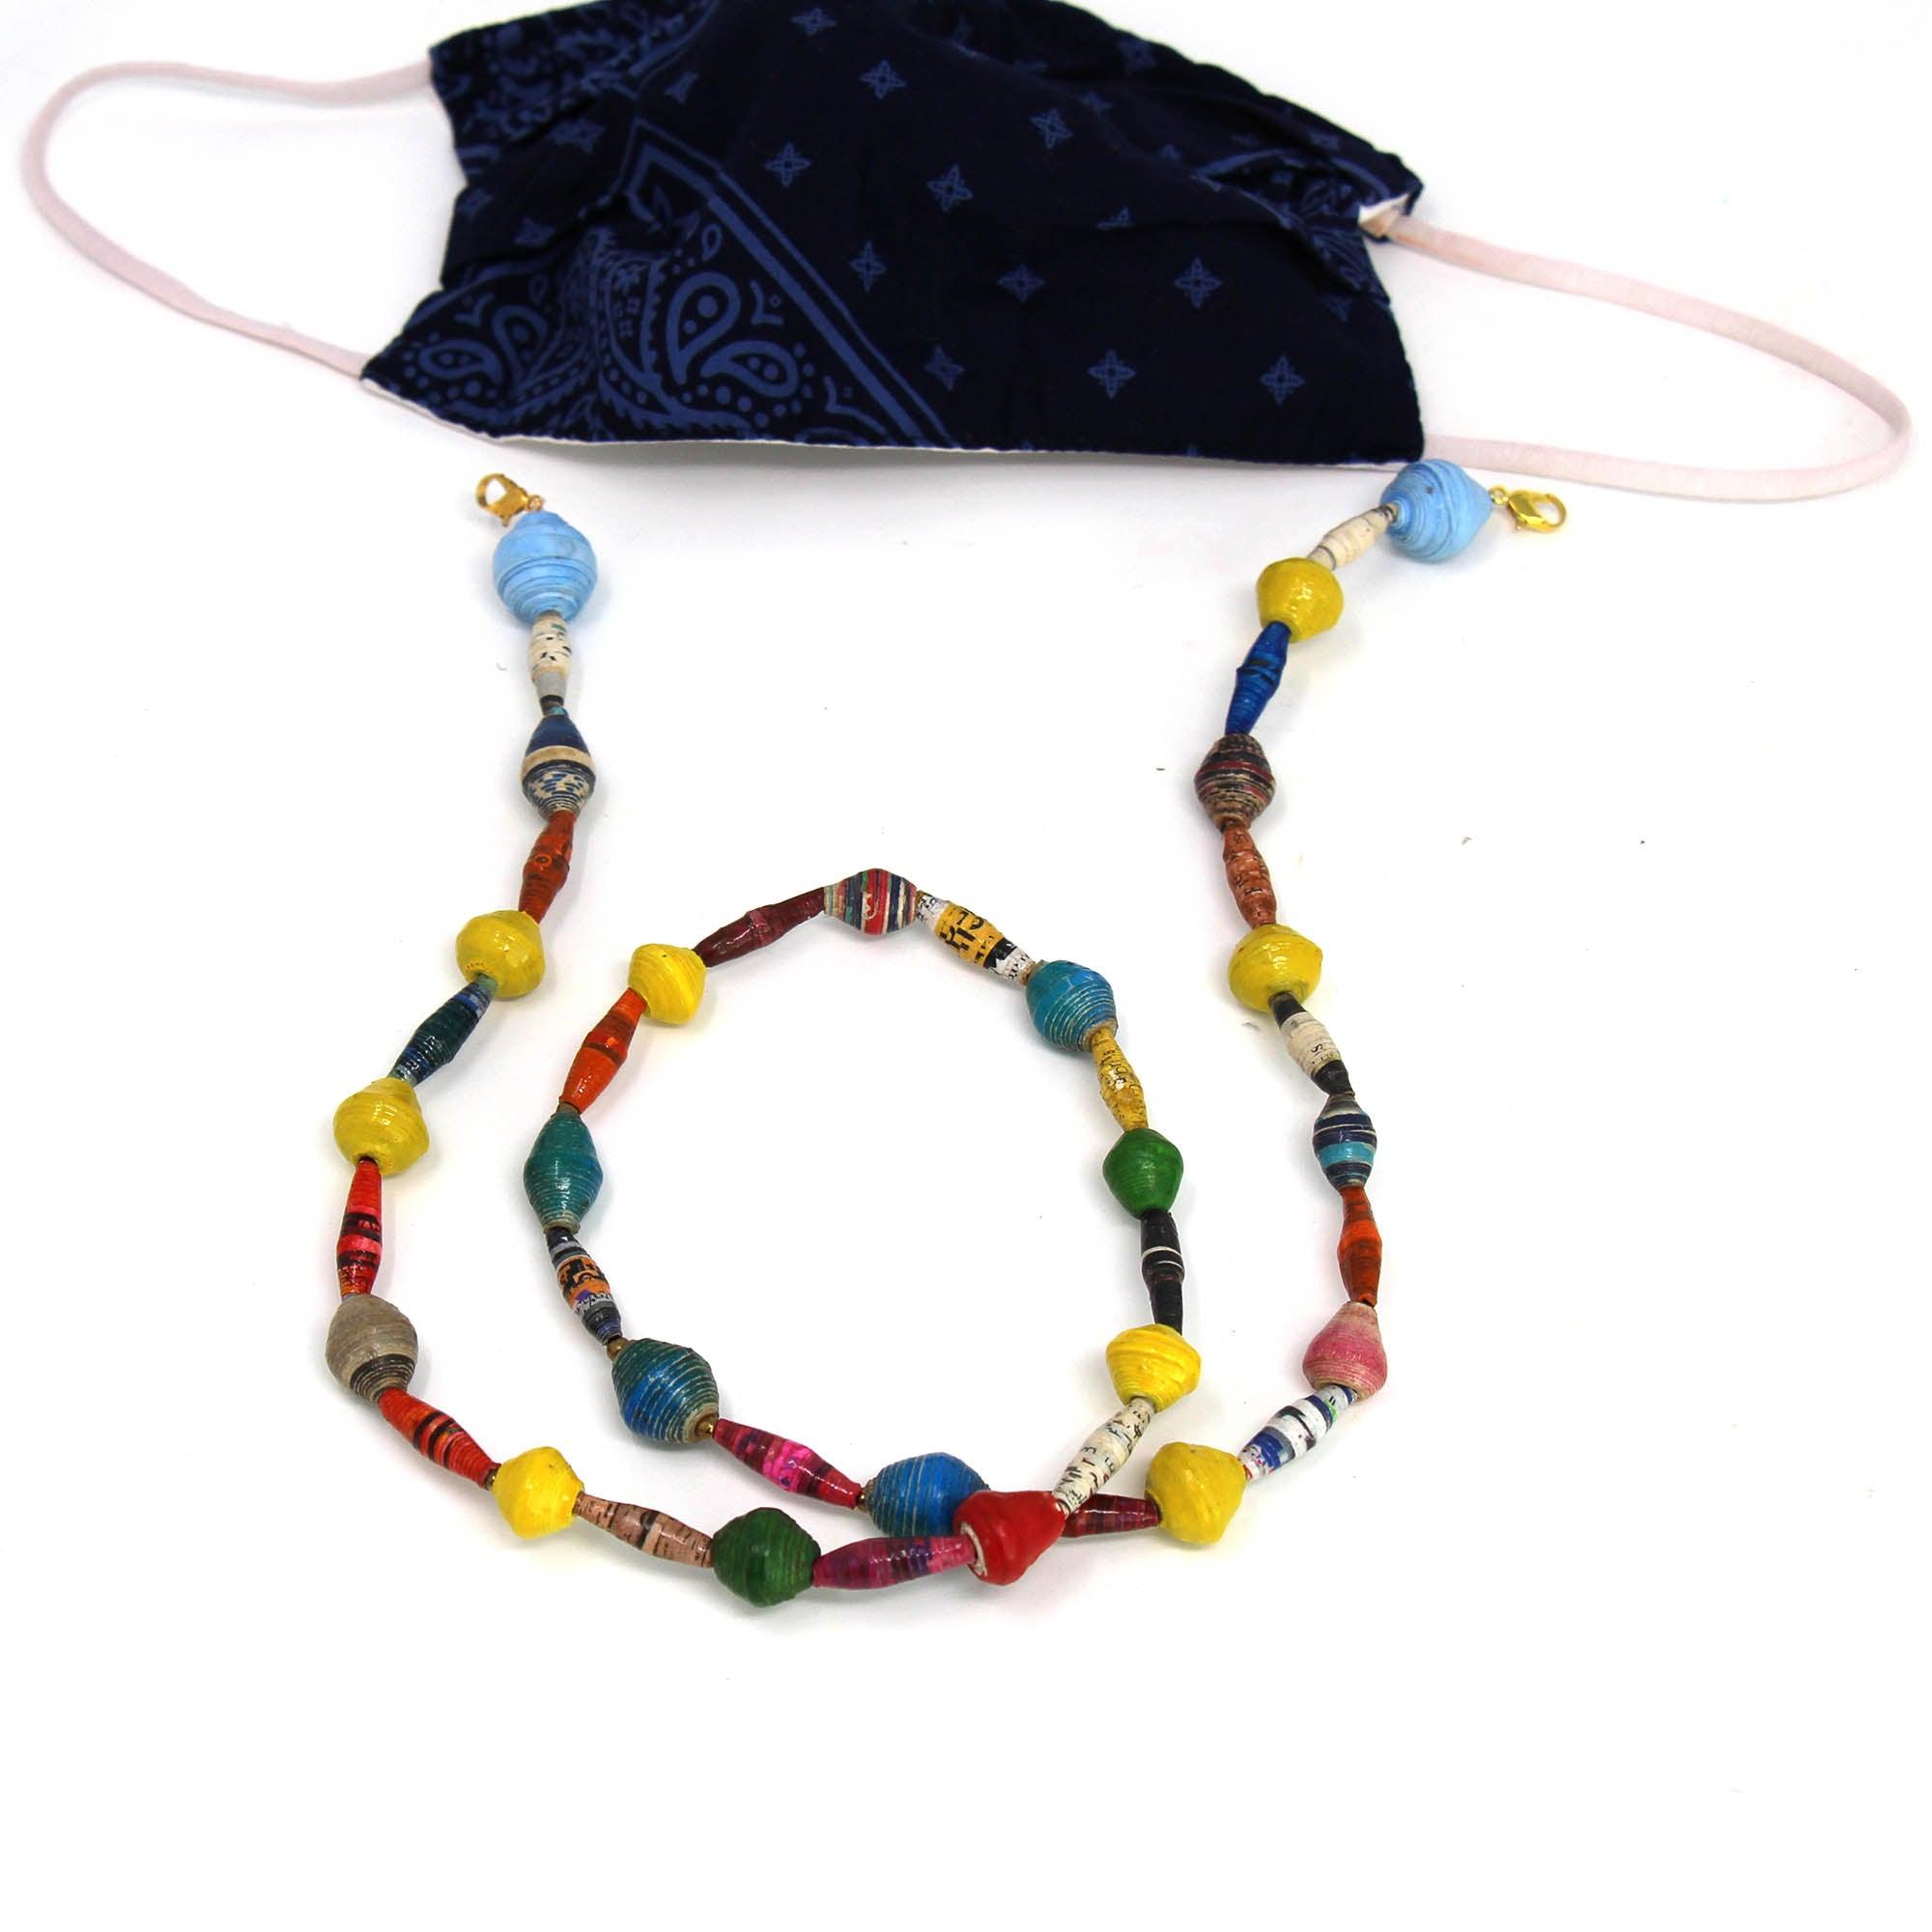 Face Mask/Eyeglass Paper Bead Chain, Colorful Mixed Shapes - Flyclothing LLC